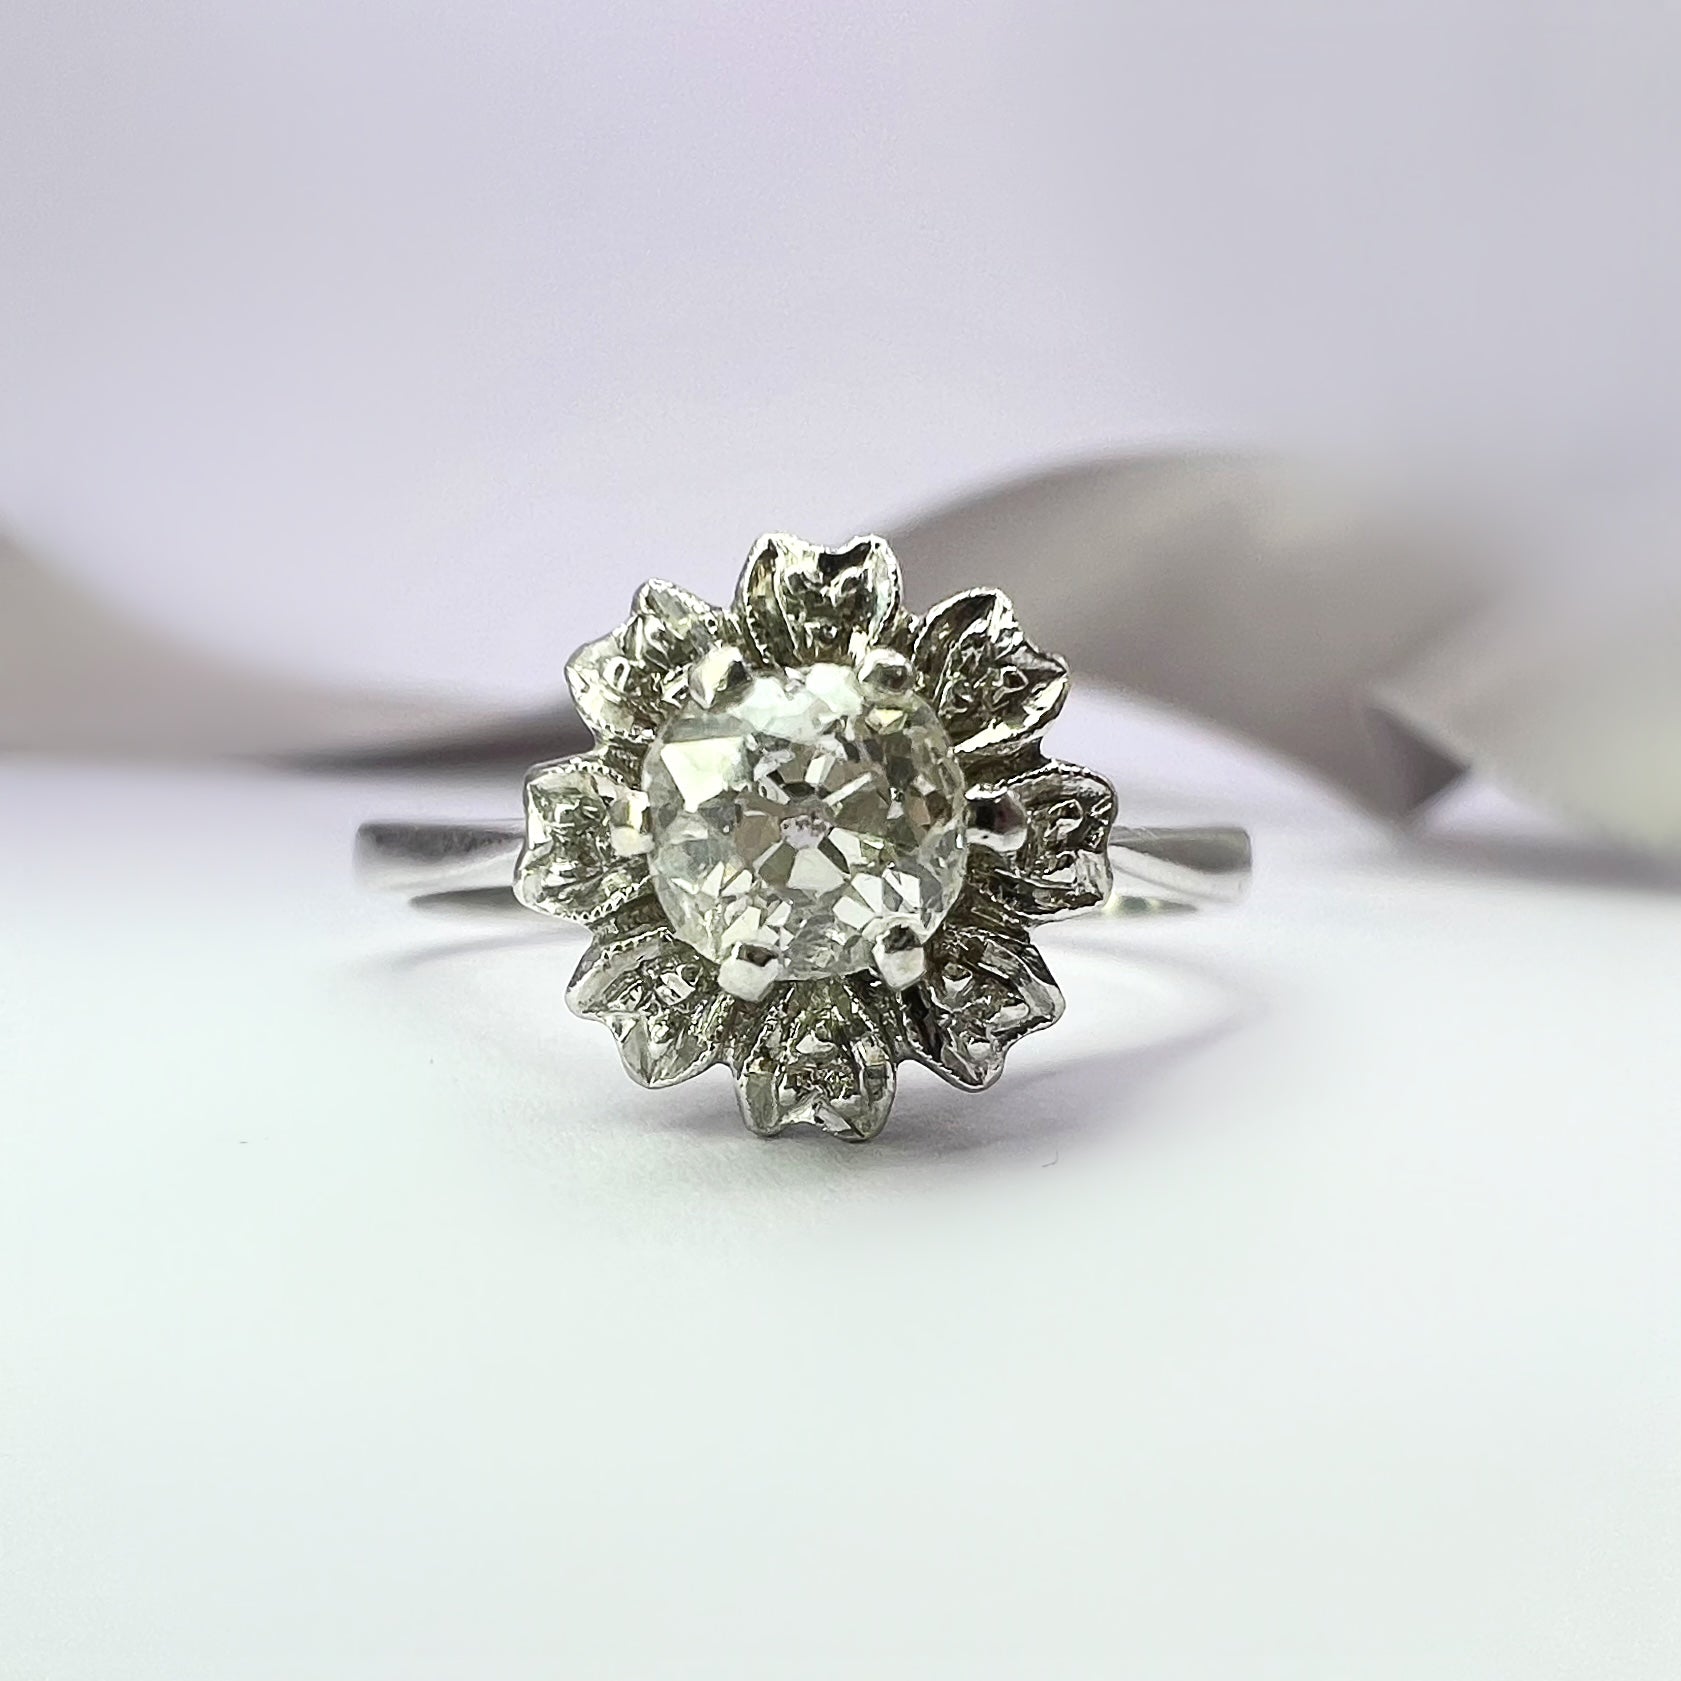 Antique 0.60ct Old Cut Diamond Solitaire Flower Ring